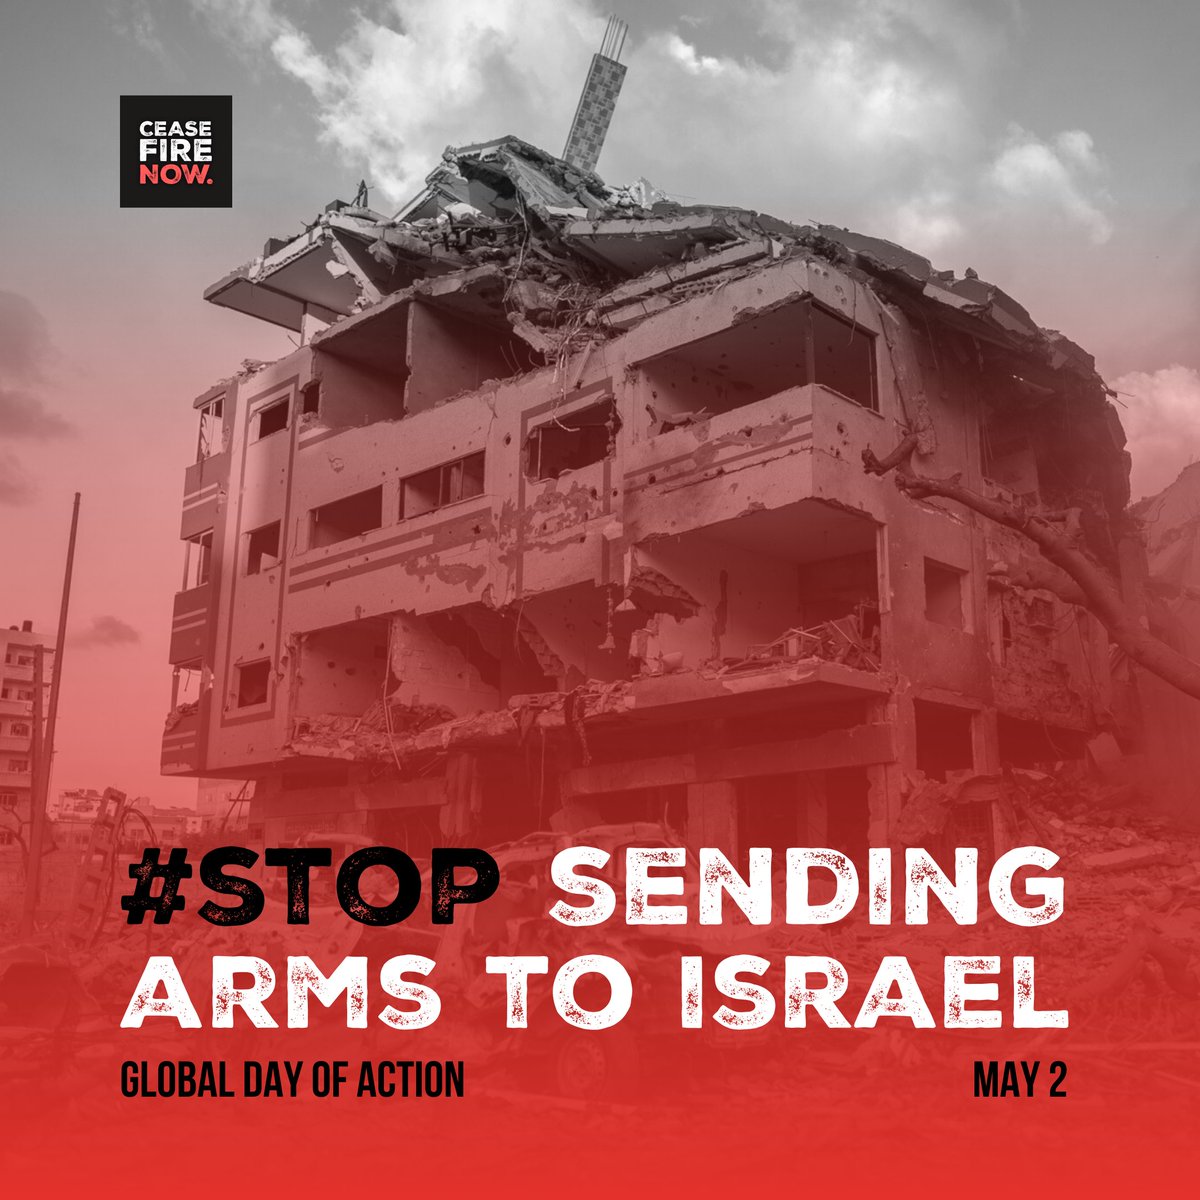 How many of your supplied arms were used to commit unlawful attacks killing Palestinians in Gaza? It’s time to #StopSendingArms. It’s time for a #CeasefireNOW! @nowceasefire